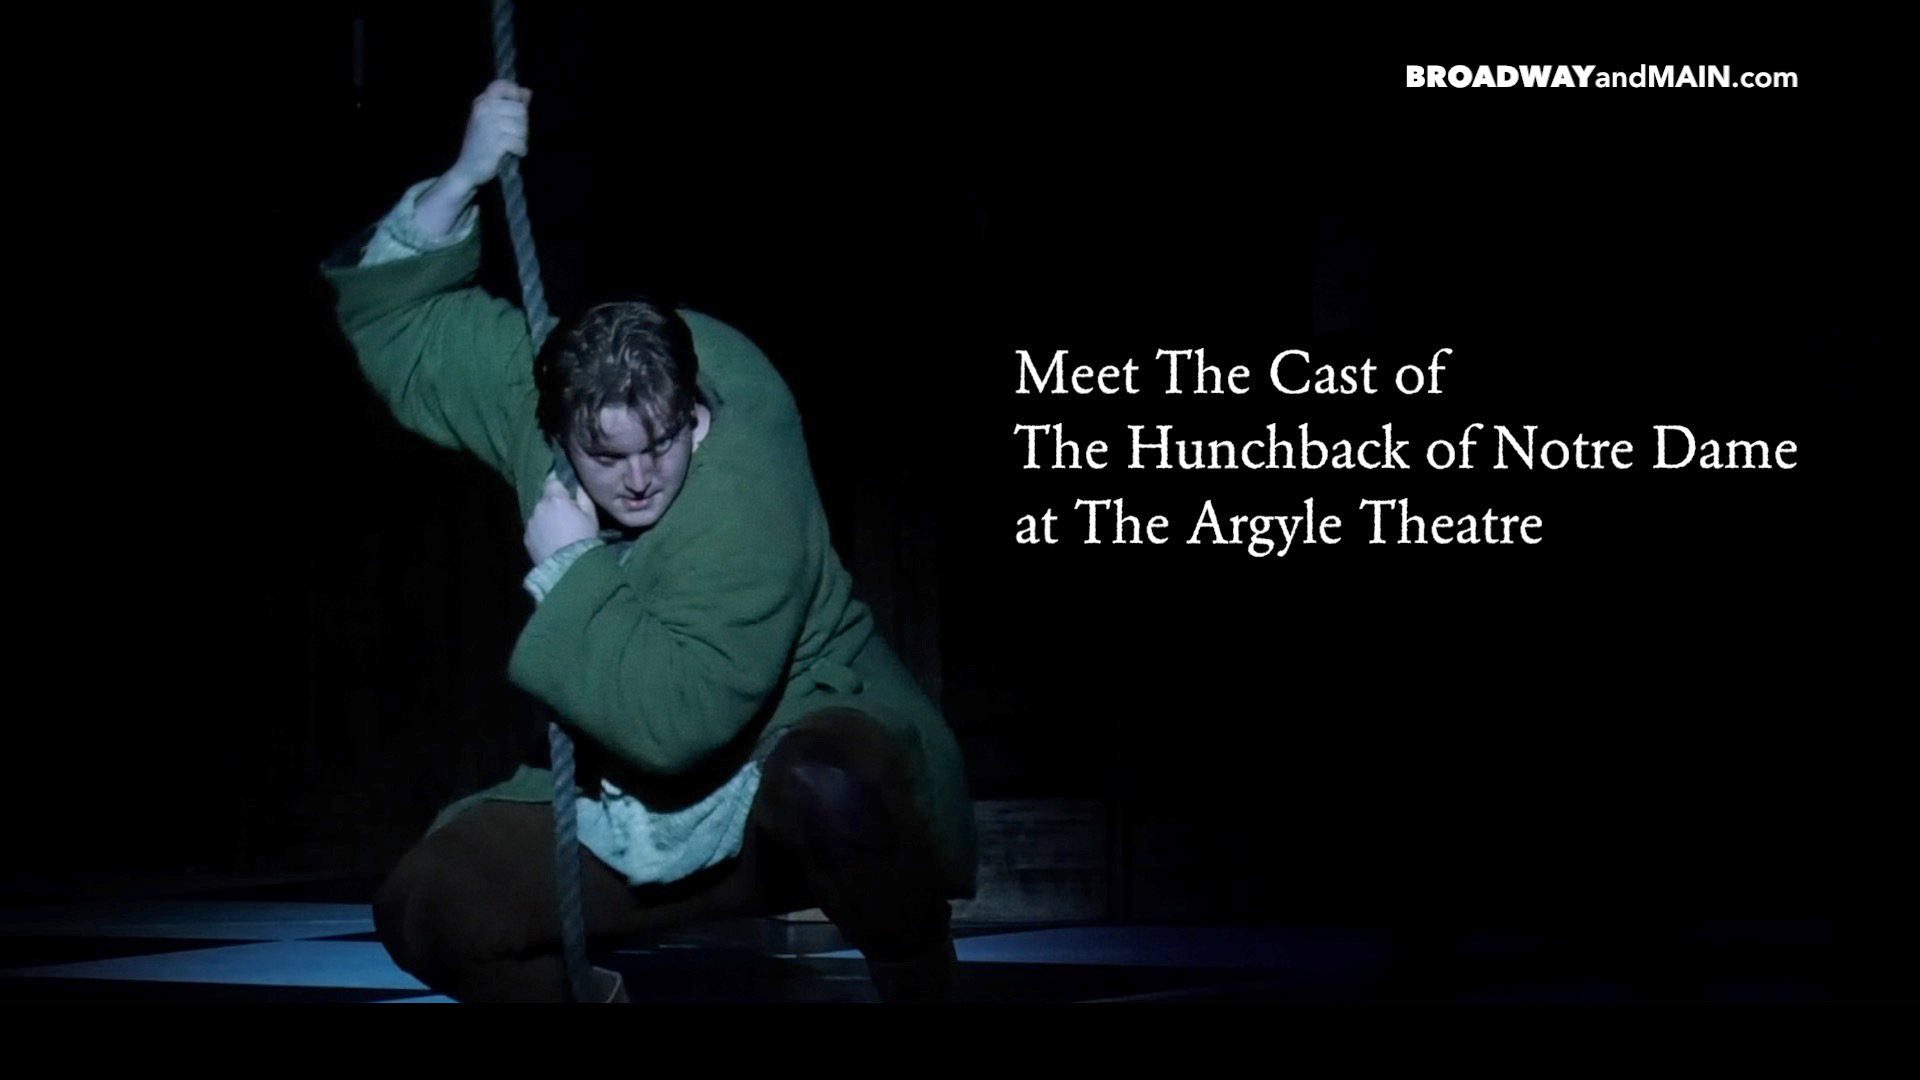 Meet the Cast of The Hunchback of Notre Dame at The Argyle Theatre